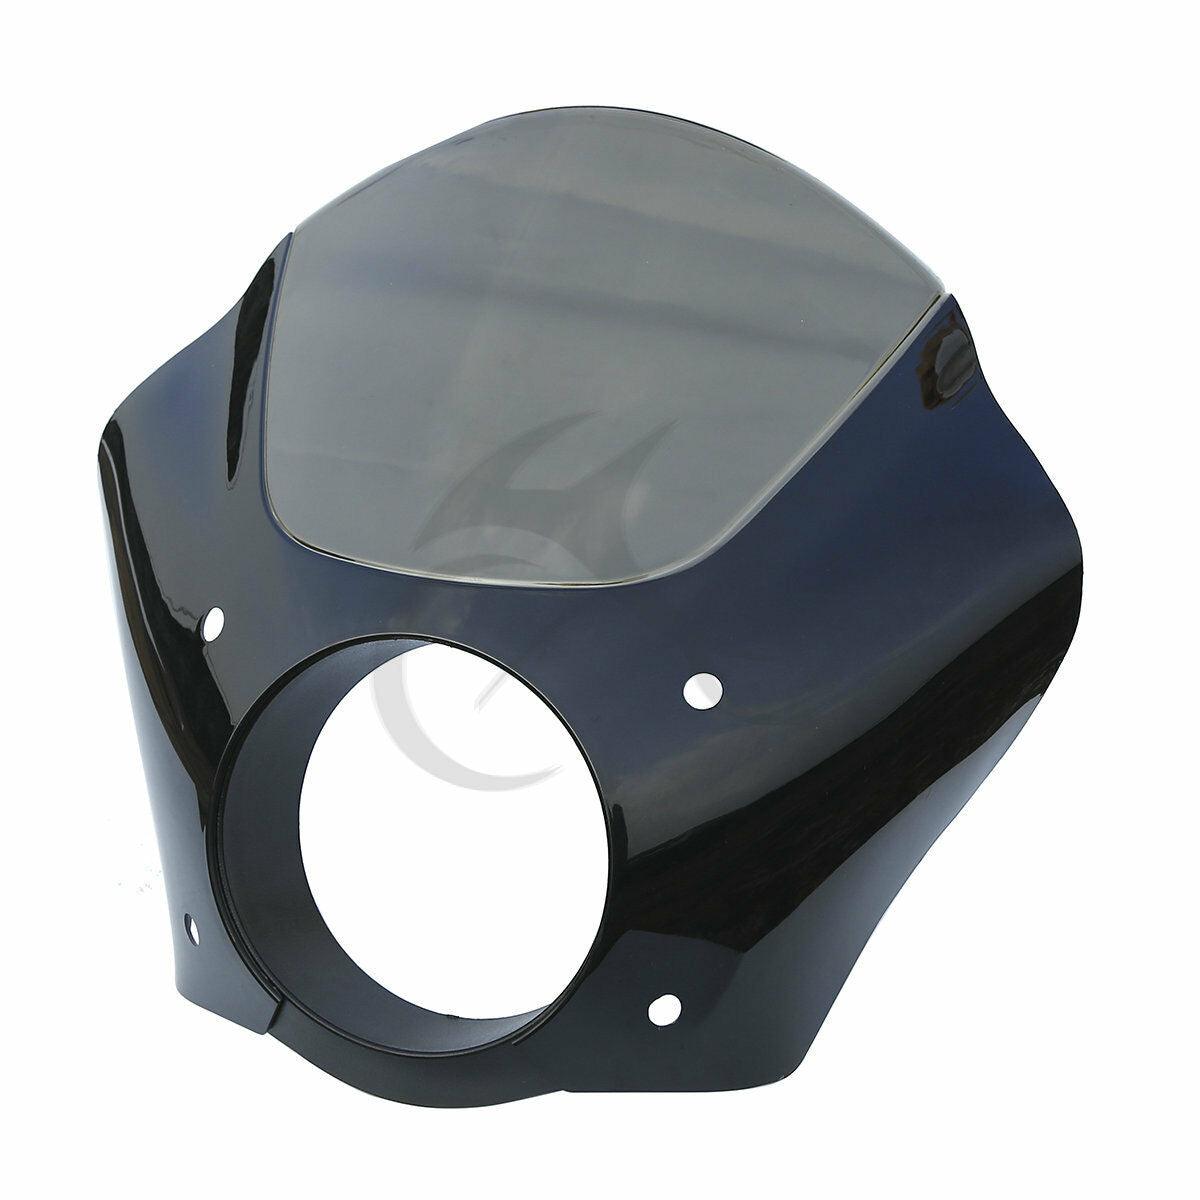 Gauntlet Fairing & Bracket Mount Fit Harley Sportster Seventy Two XL 1200 883 US - Moto Life Products